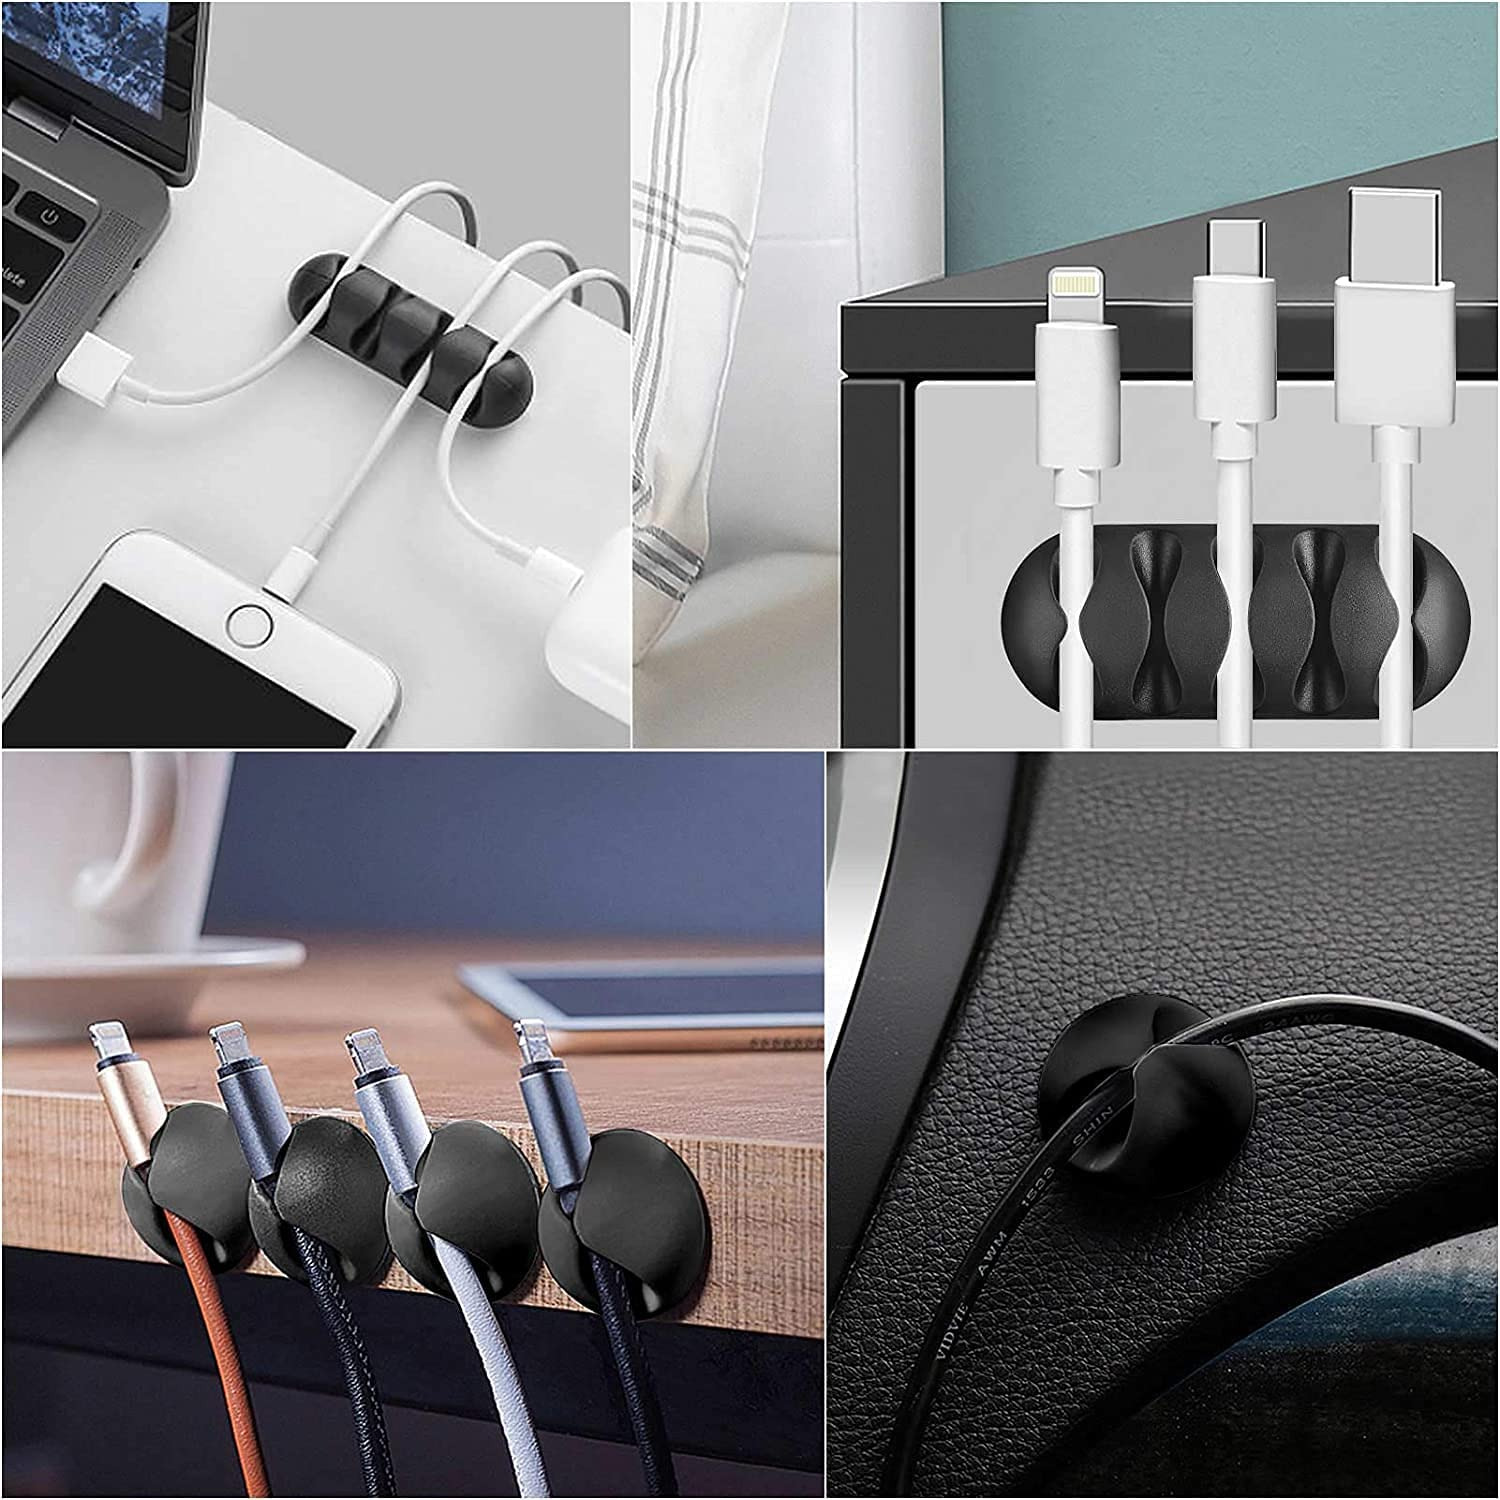 SDF Set of 10 Cable Organiser, Cable Protector & Wire Organizer Clips for Cables, Reusable Cable Organizer for Desk, WFH Accessories, Multipurpose Silicone Adhesive Hooks